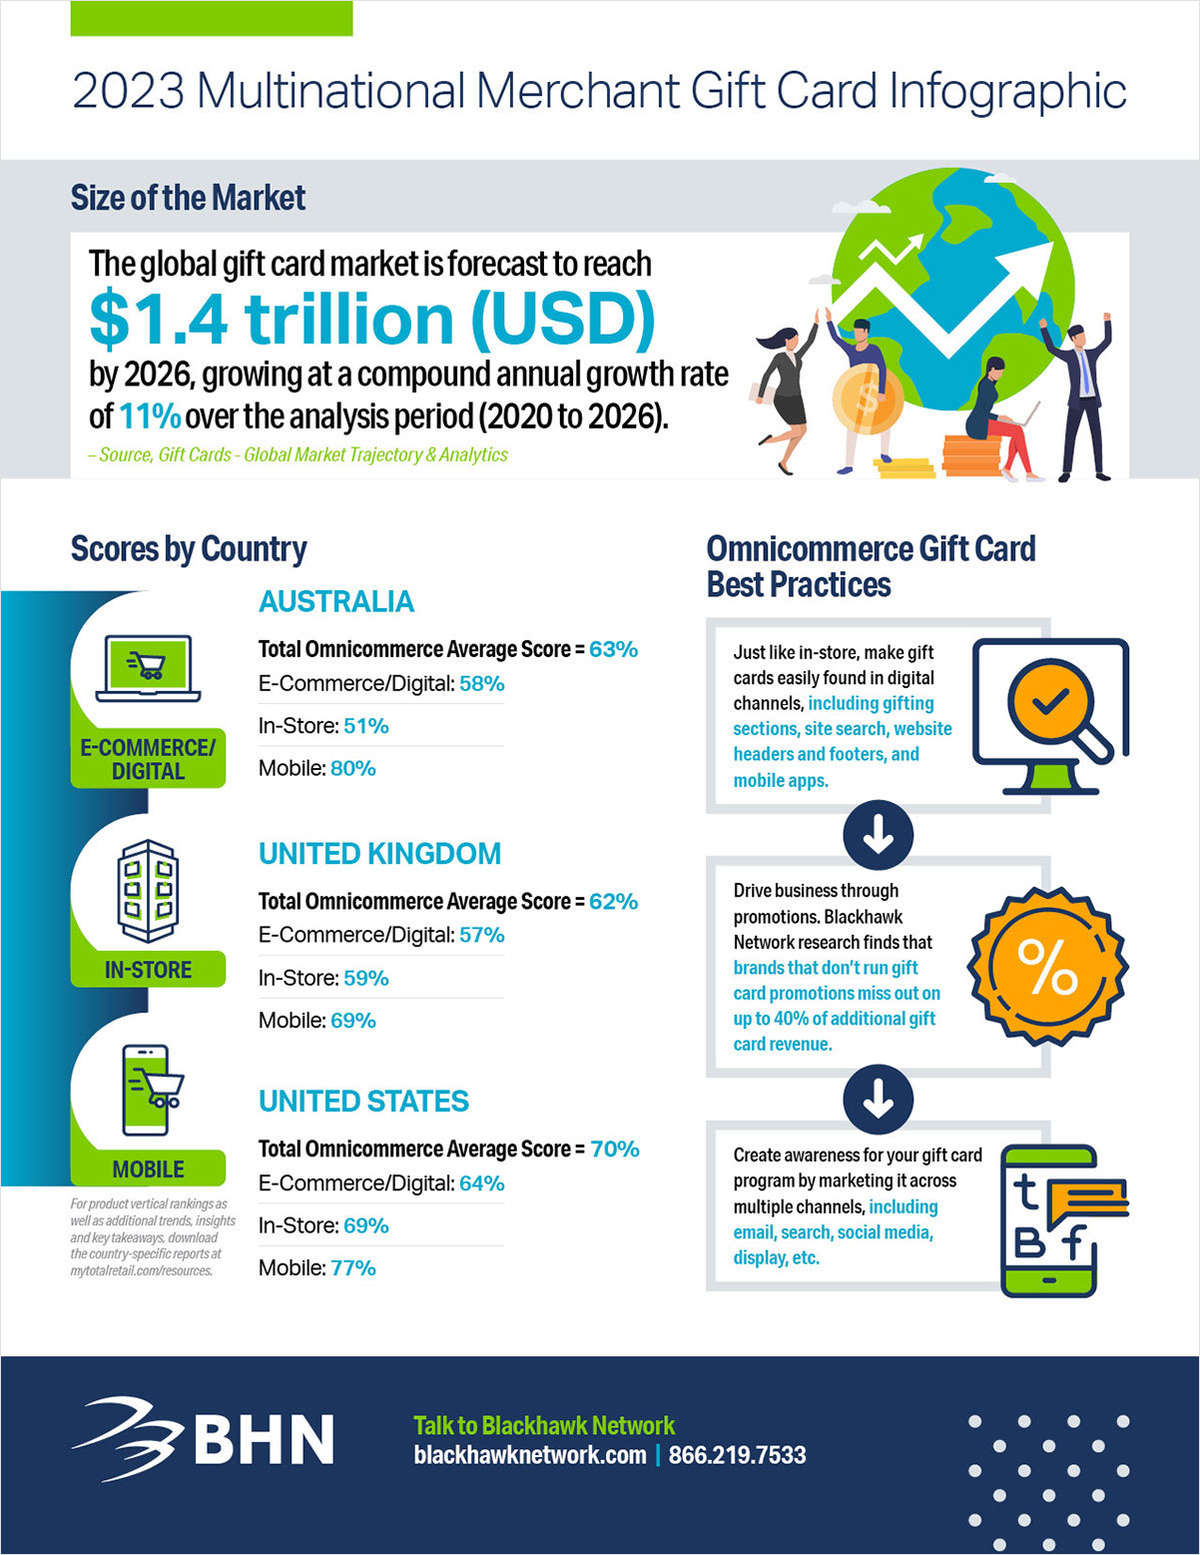 2023 Multinational Merchant Gift Card Infographic